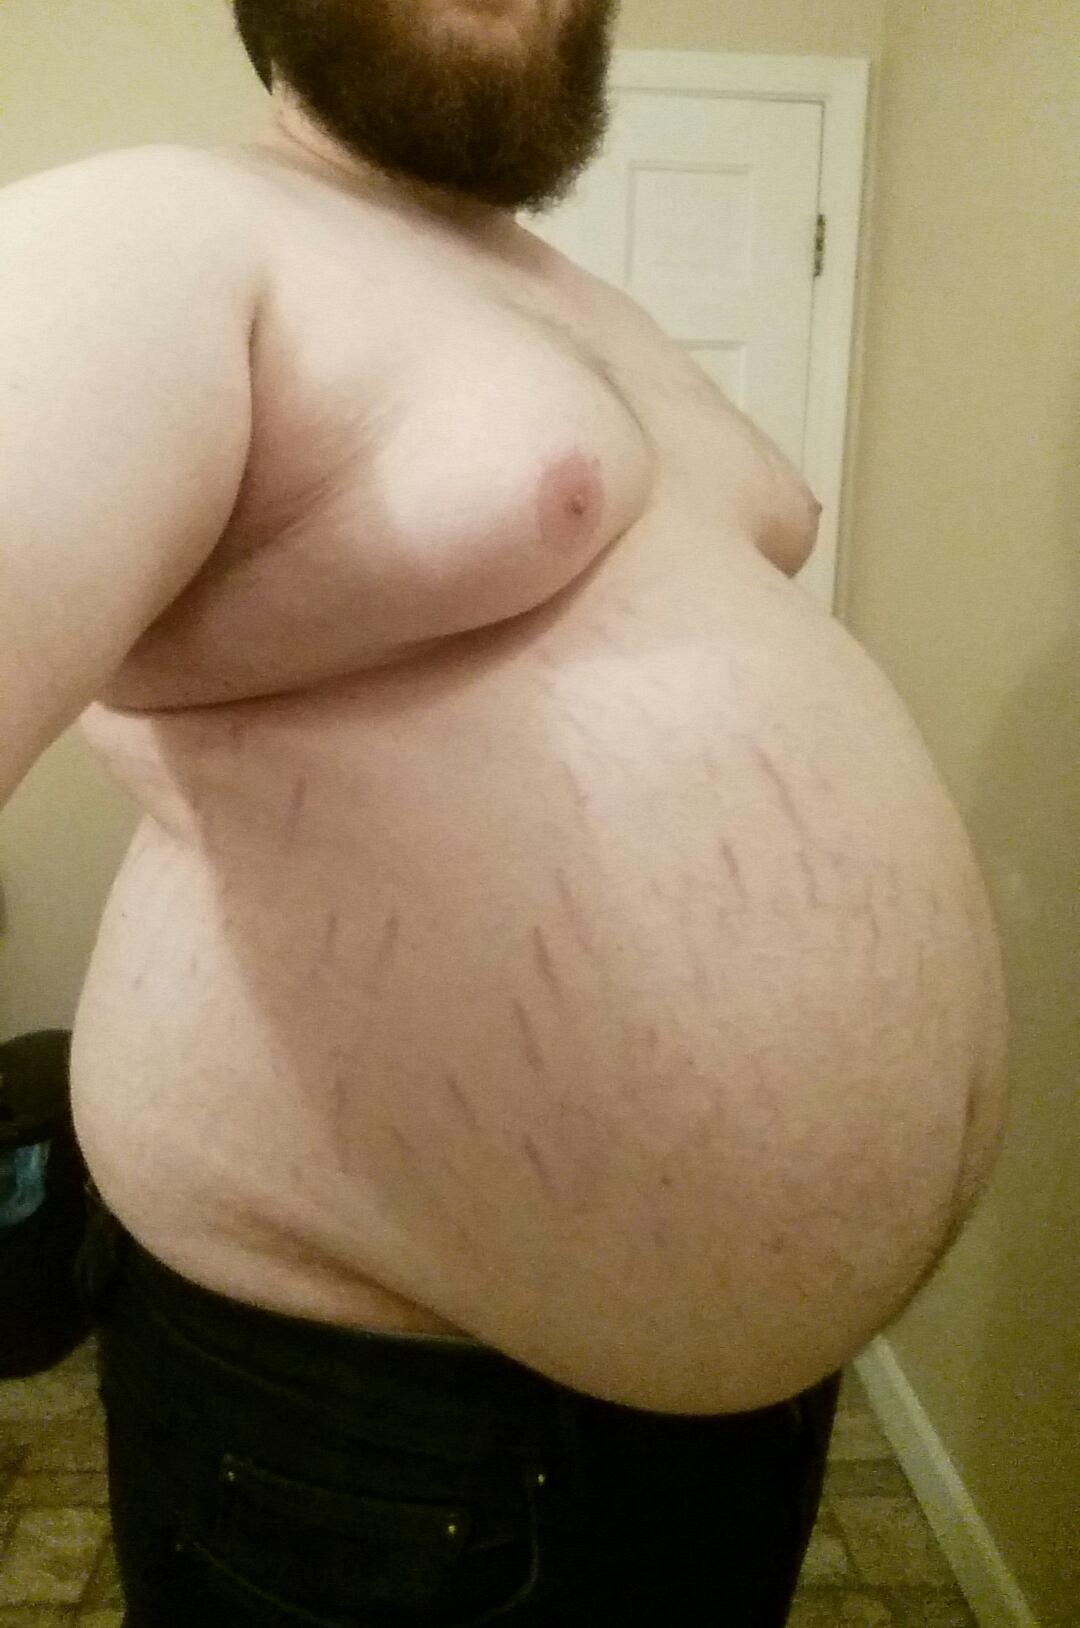 Does this gut make me look fat?